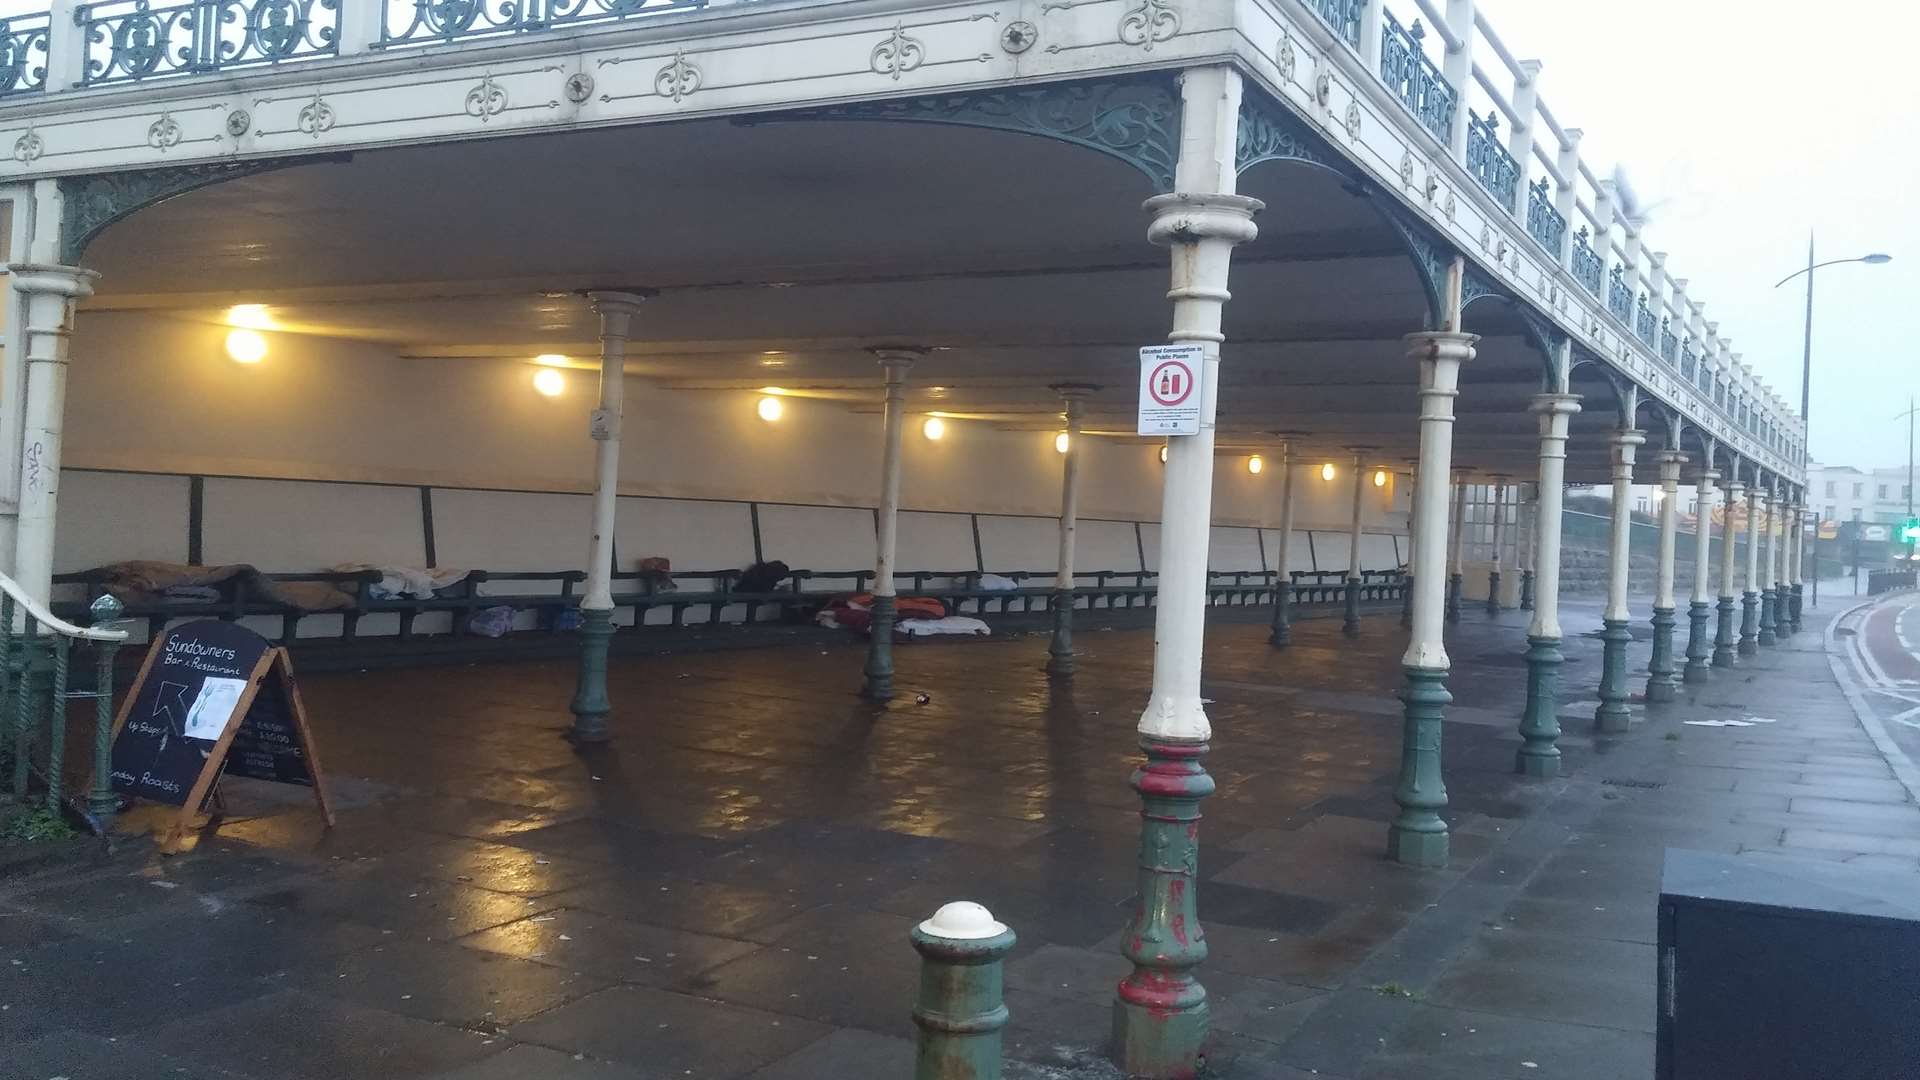 Homeless people have moved back into the Victorian shelter in Margate